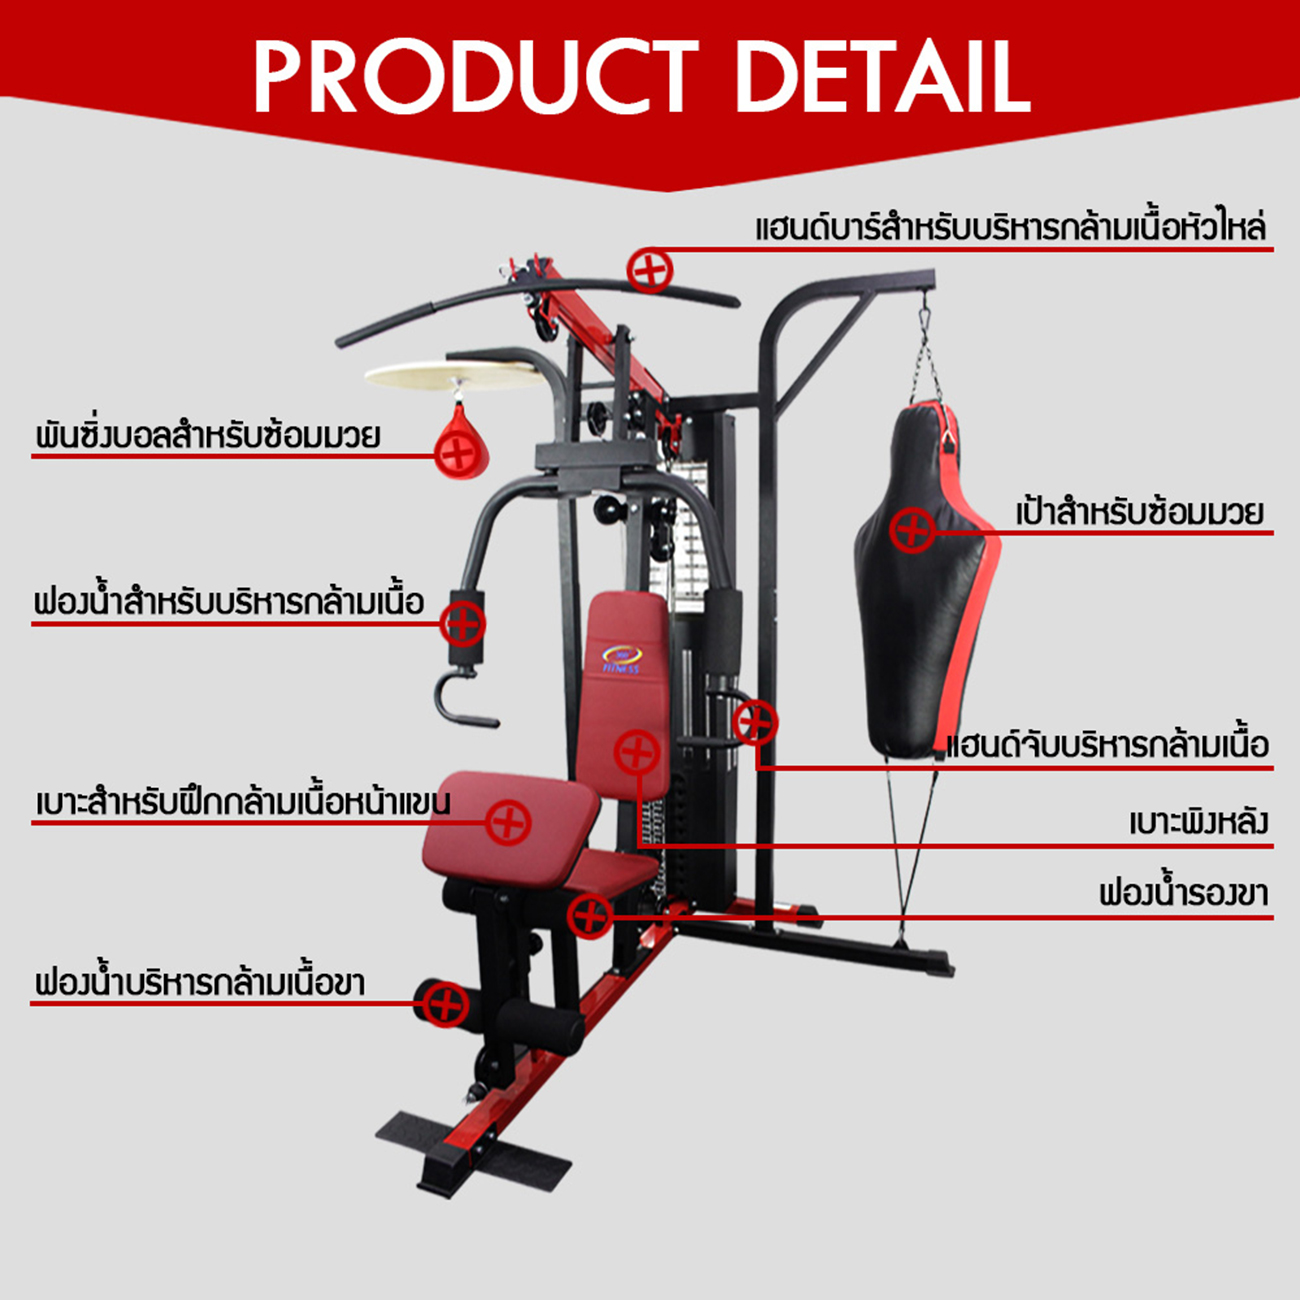 Multi Gym with Boxing Station รุ่น TO-178B